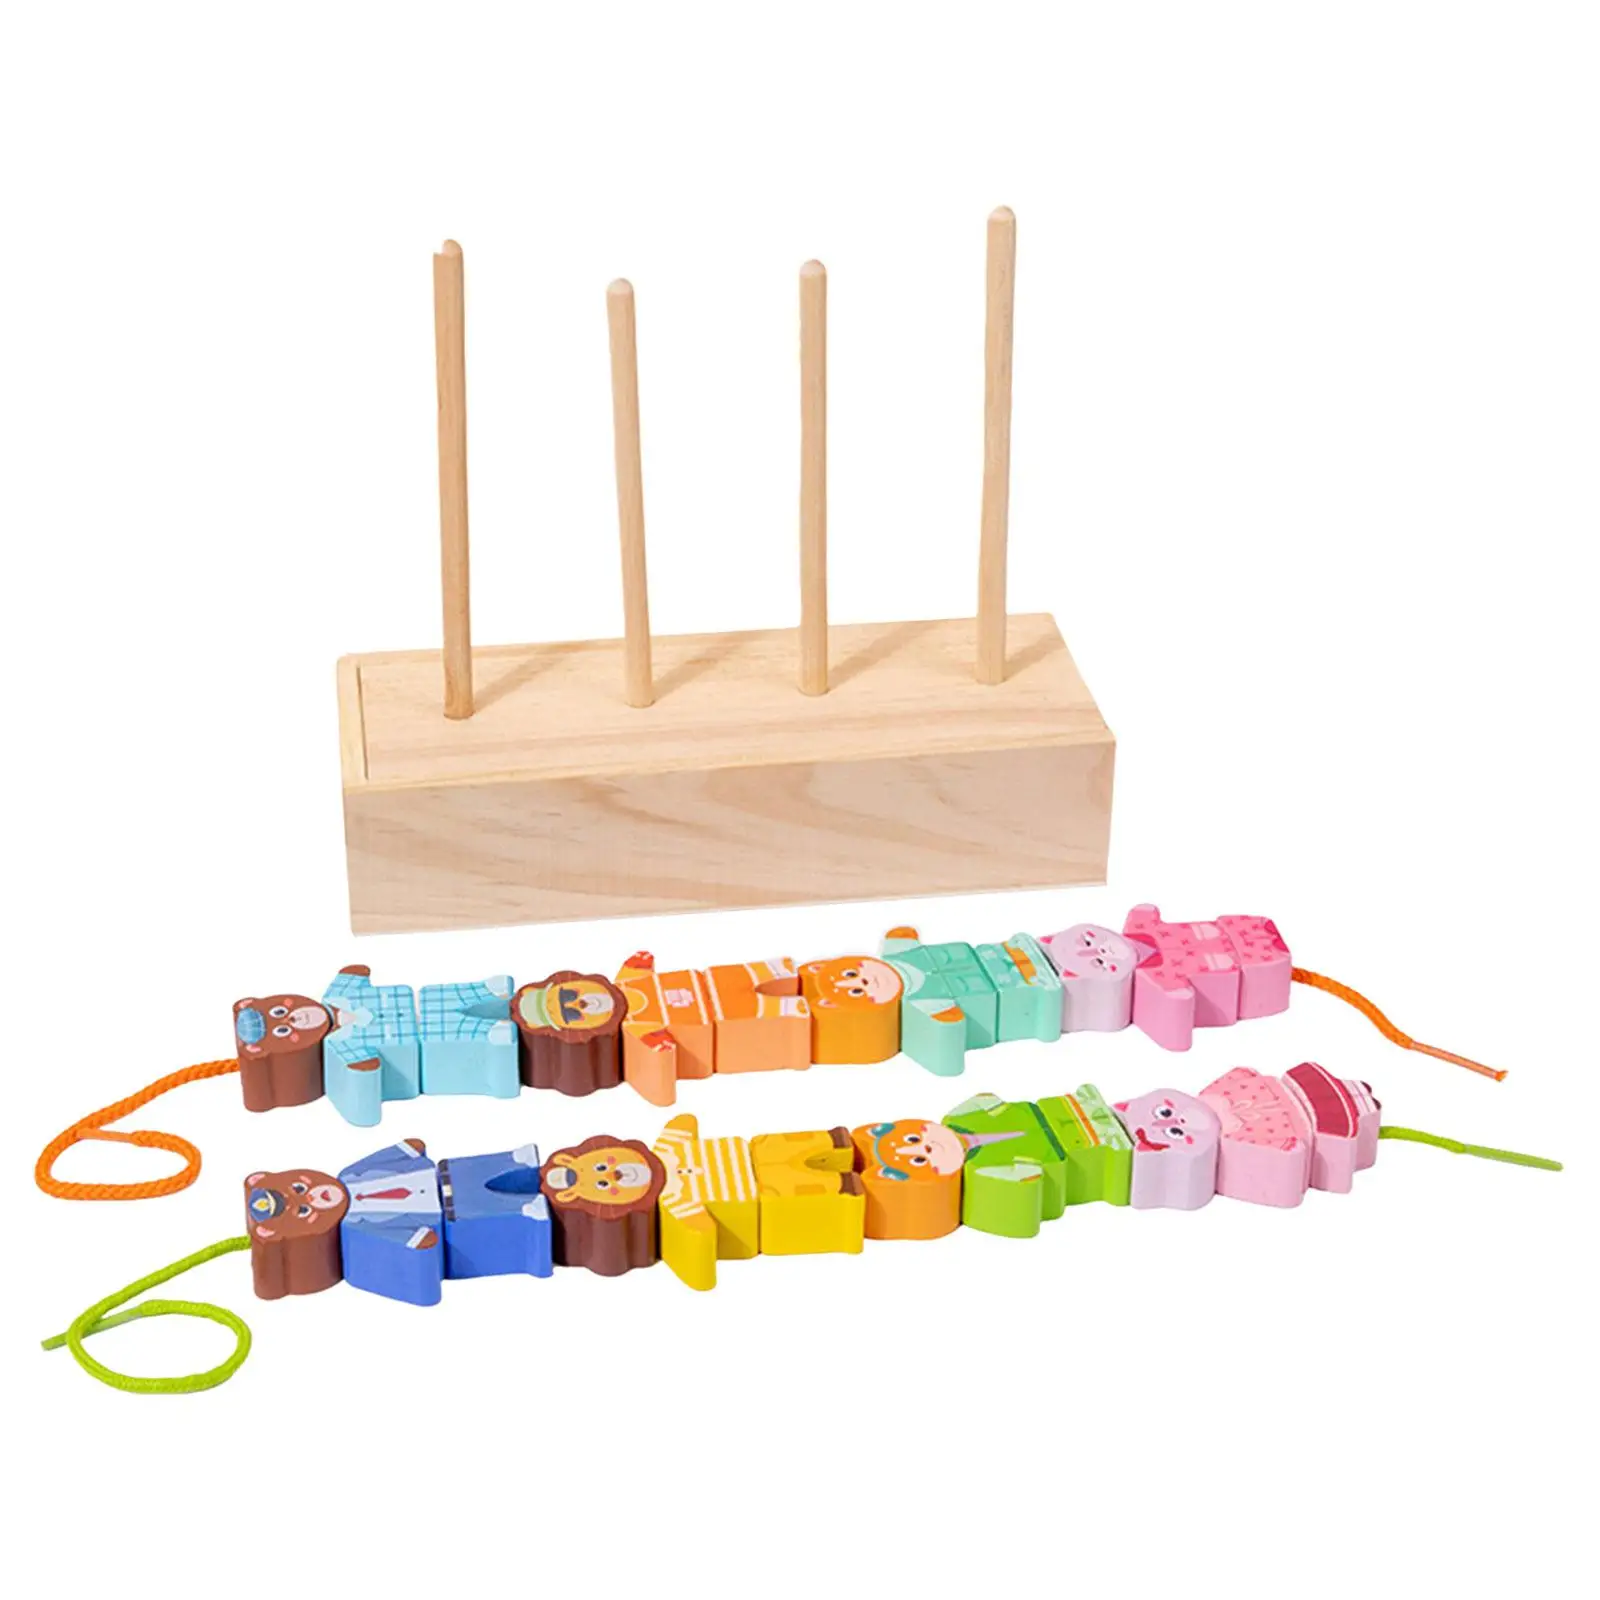 Wooden Lacing Beads Animals Stringing Blocks Cute Educational Toy for 1 2 3 4 Years Old Boys Children Girls Hoilday Gifts